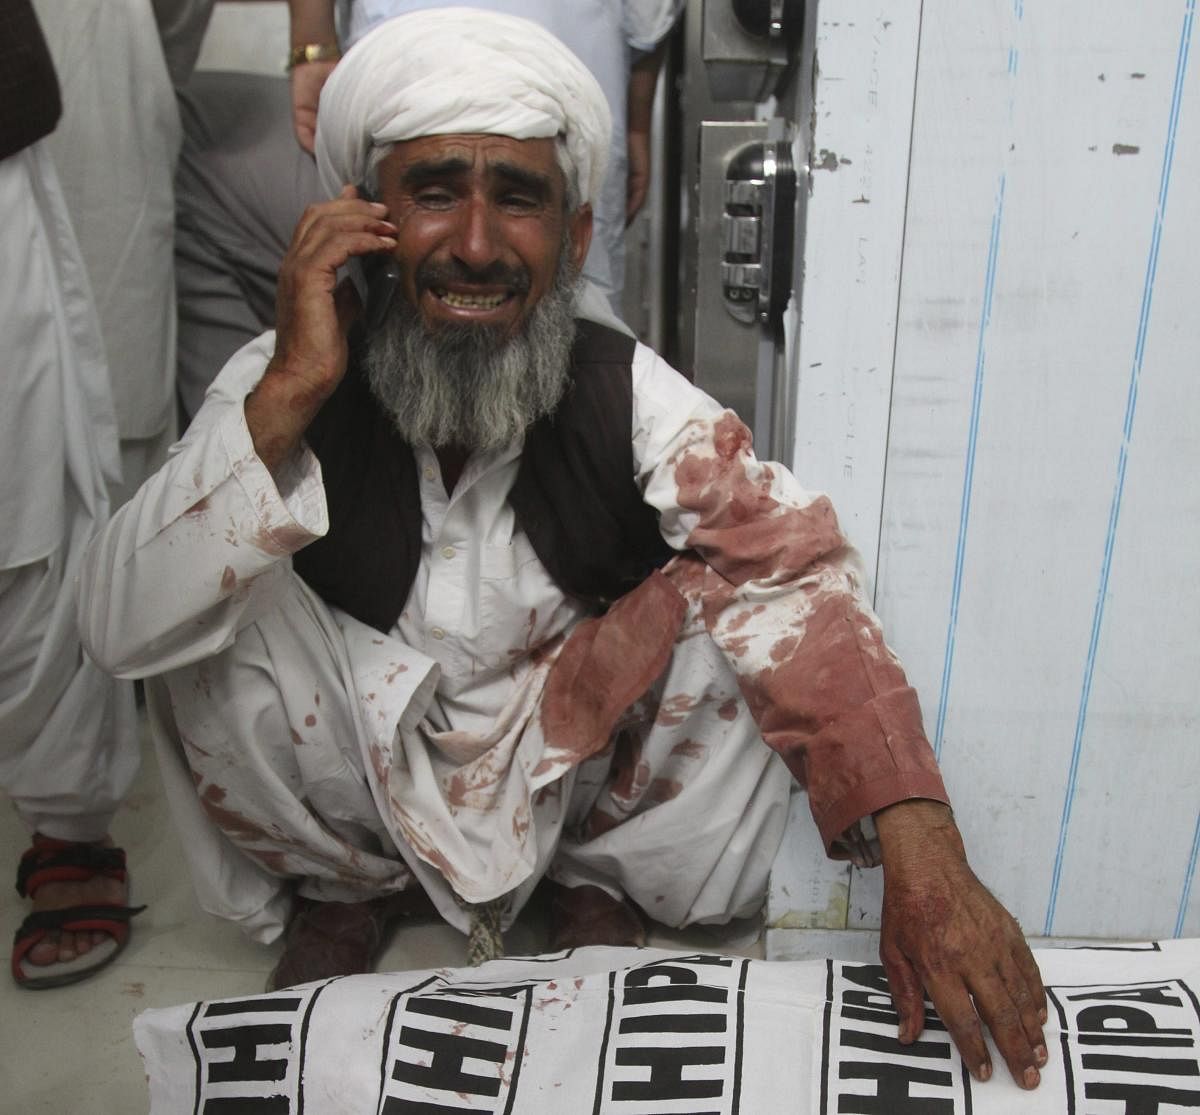 A man talks on a phone sitting next to a body of his family member killed in a bomb attack, in Quetta, Pakistan, Friday, July 13, 2018. (AP/PTI)